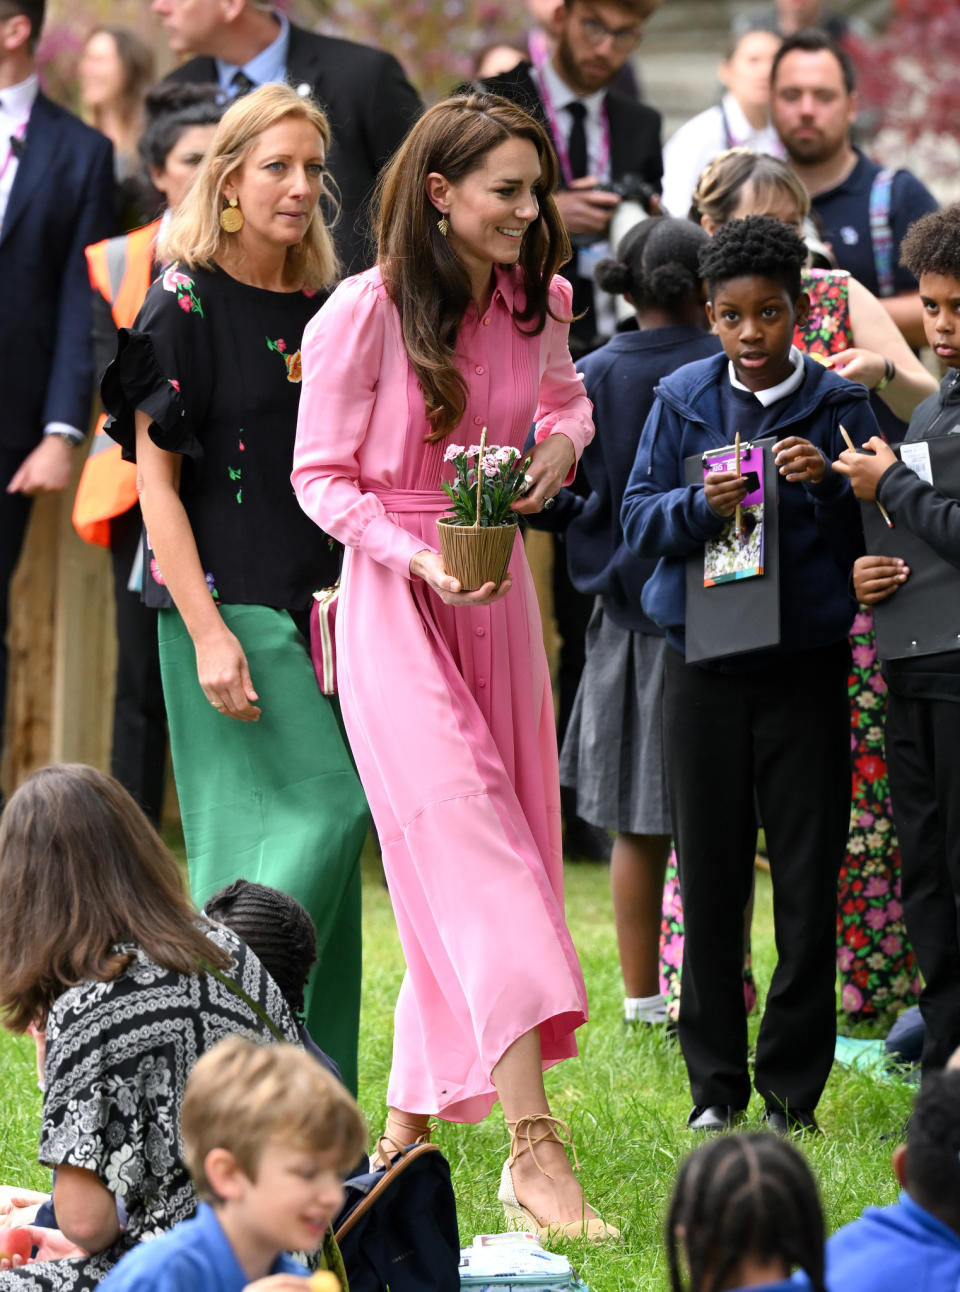 At the Chelsea Flower Show picnic, Kate brought back a two-tone pink ME + EM dress, accessorizing with Castañer wedges and Catherine Zoraida earrings.